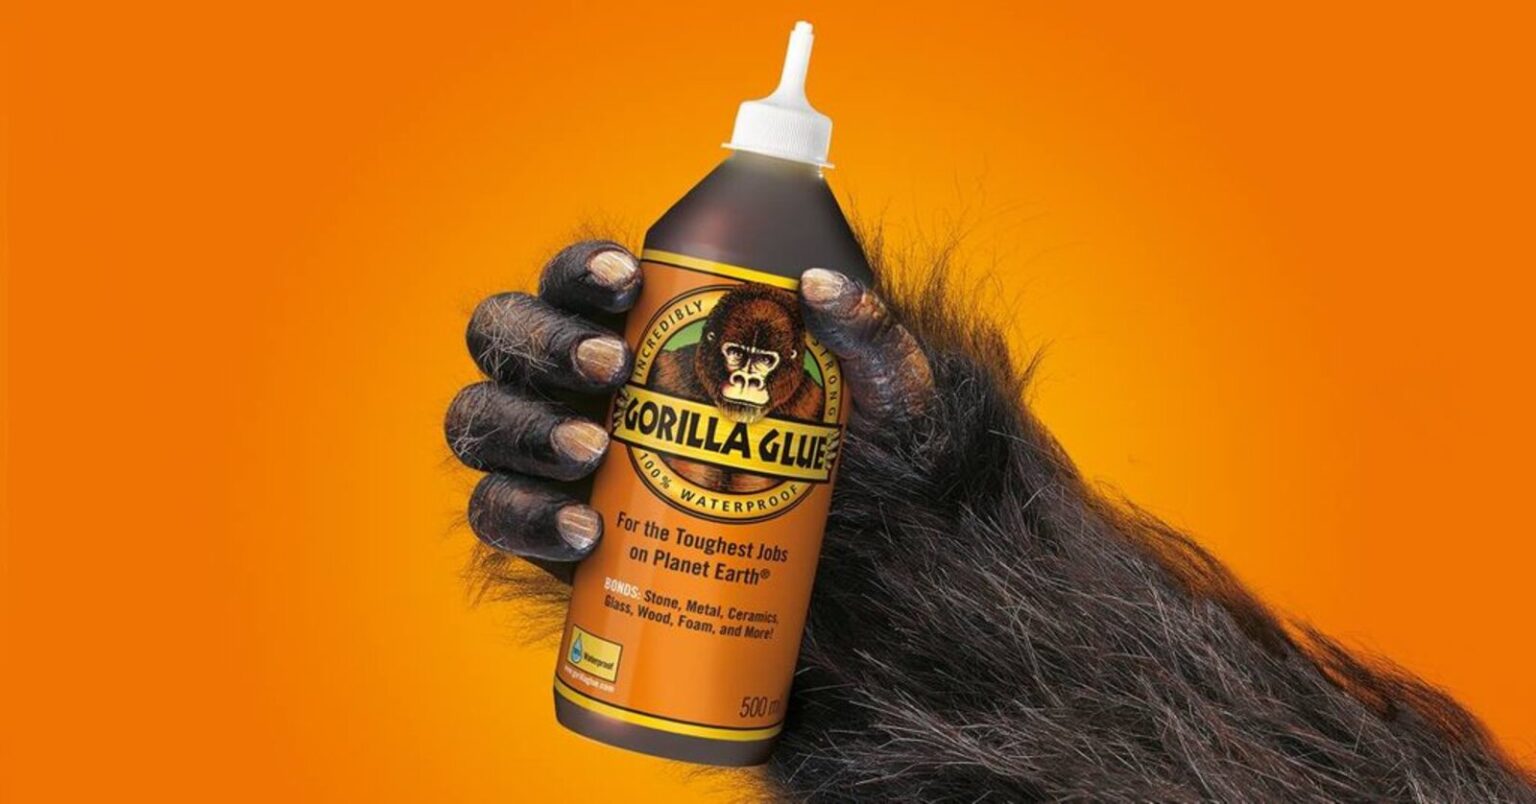 Why on earth would anyone use Gorilla Glue in their hair? Here's how Twitter suggests you remove it and get out of that sticky situation.